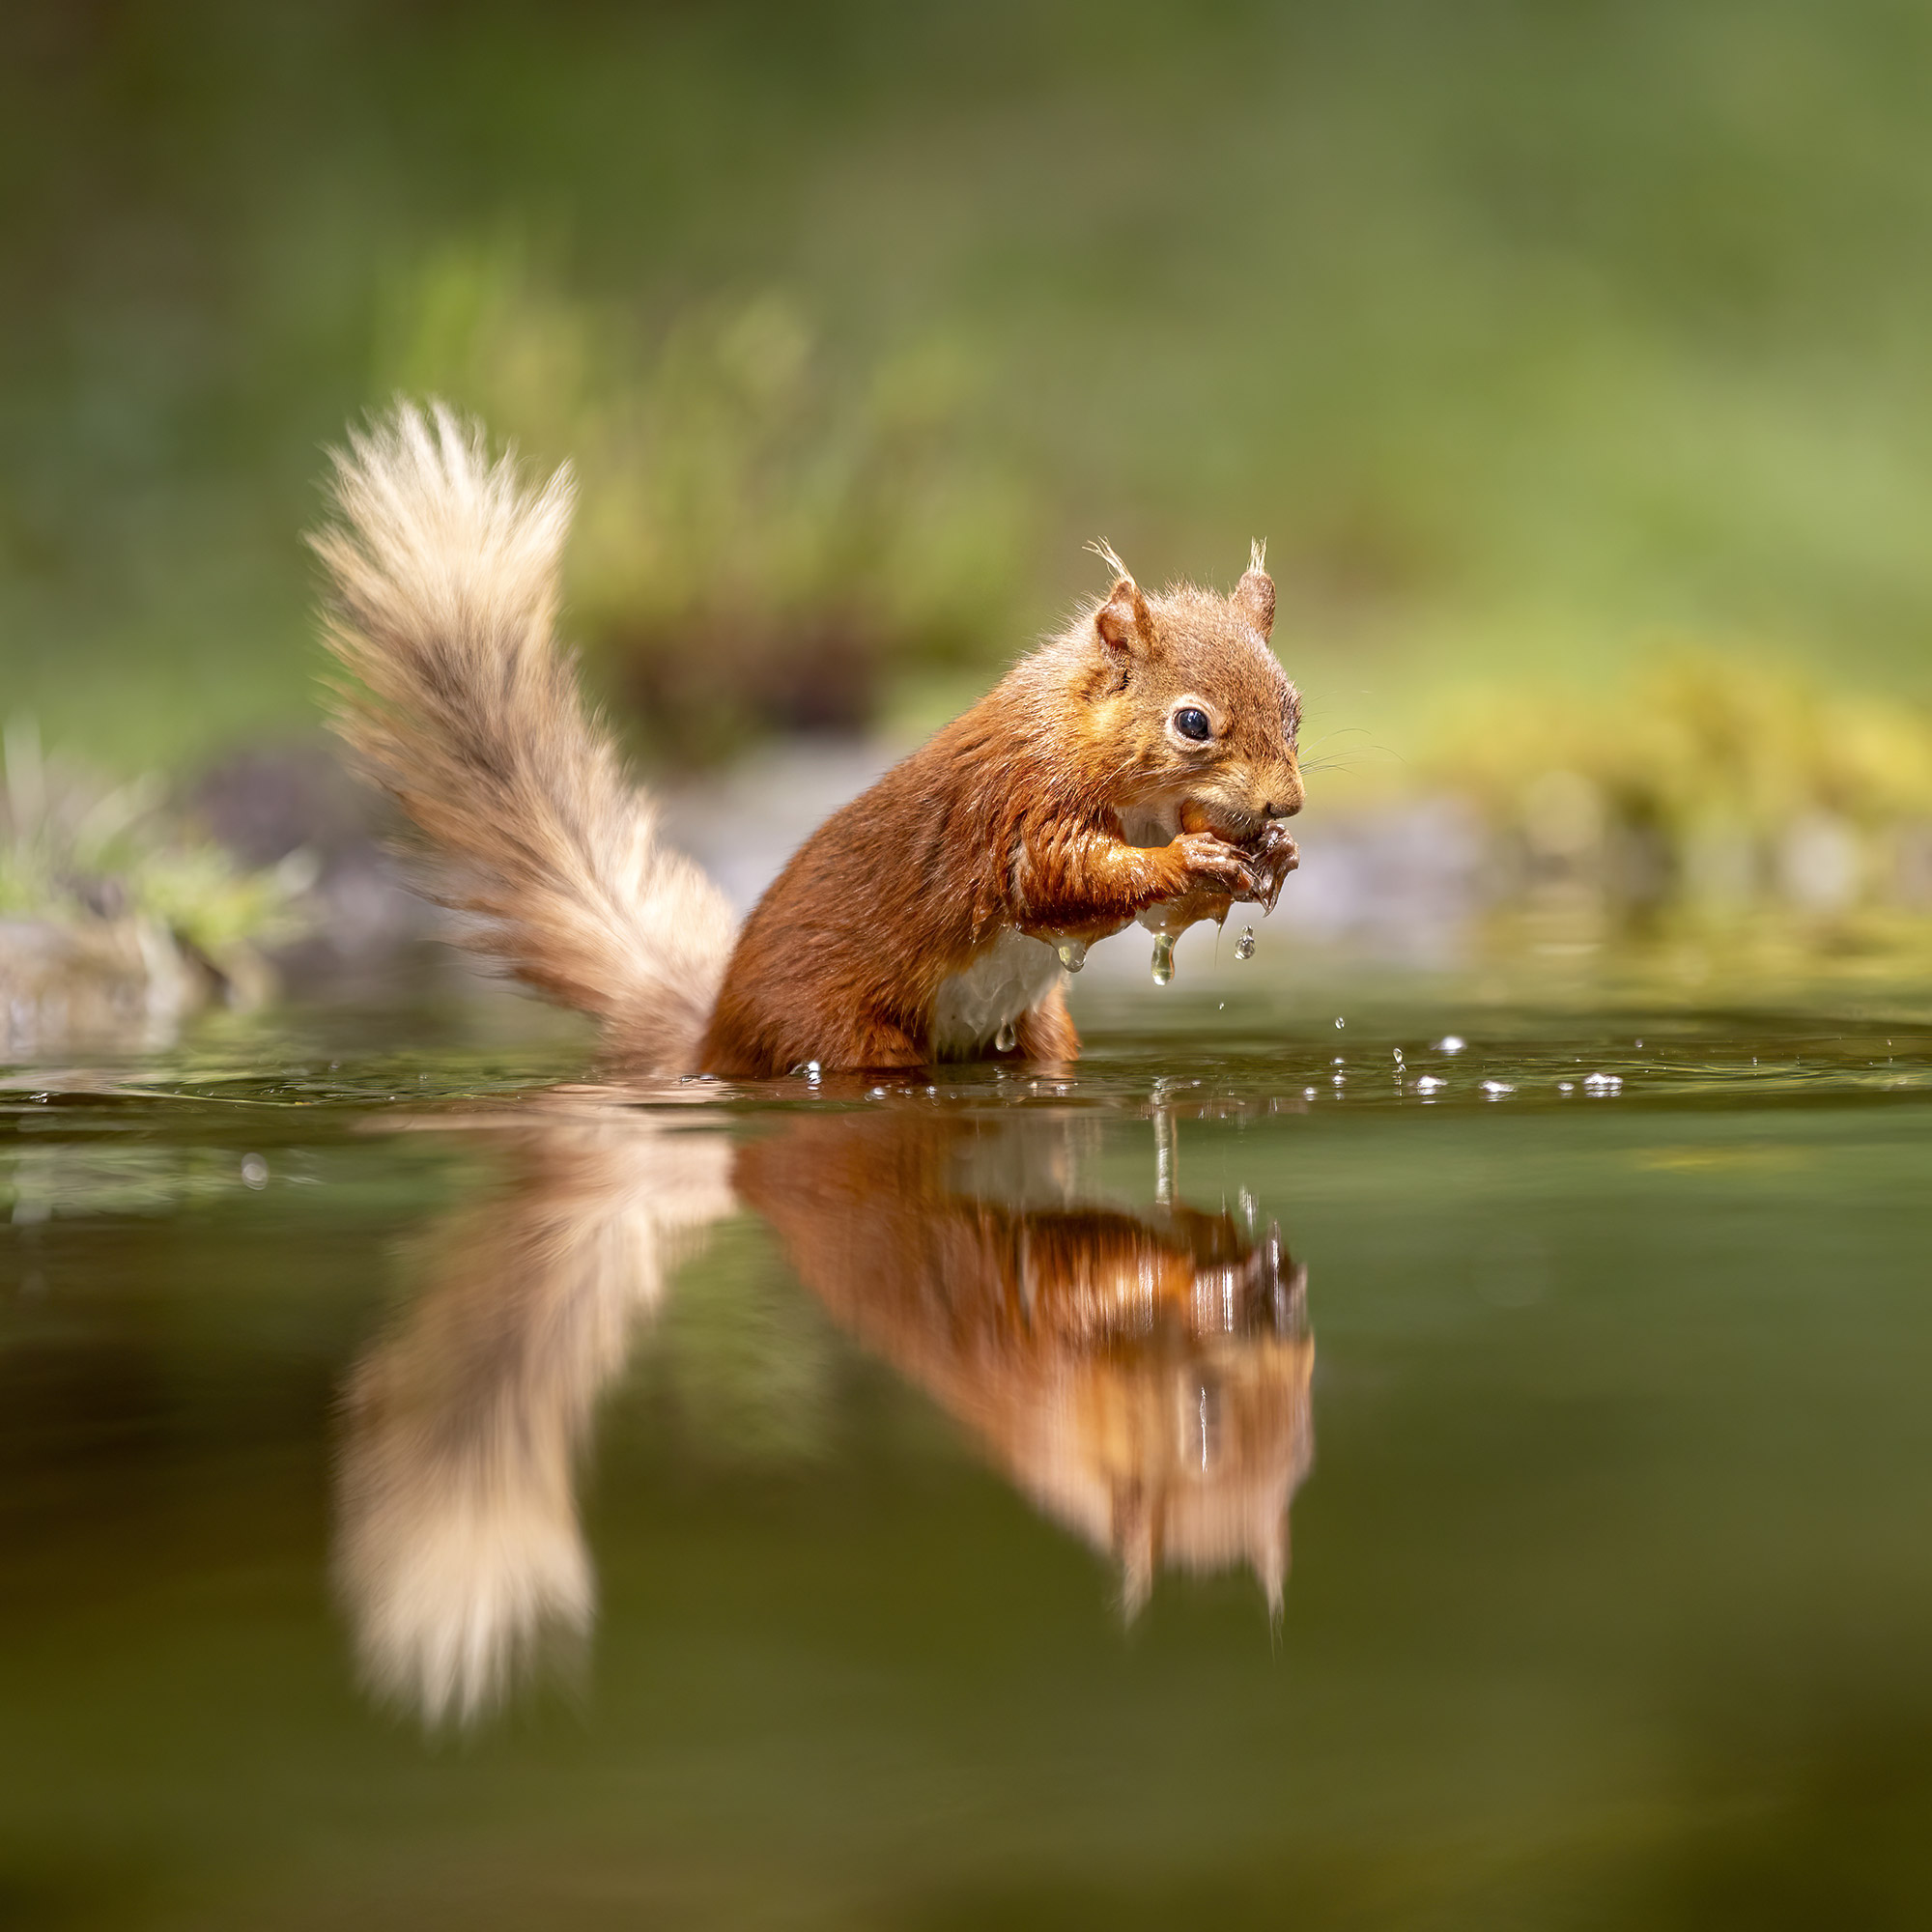 Photographing Red Squirrels